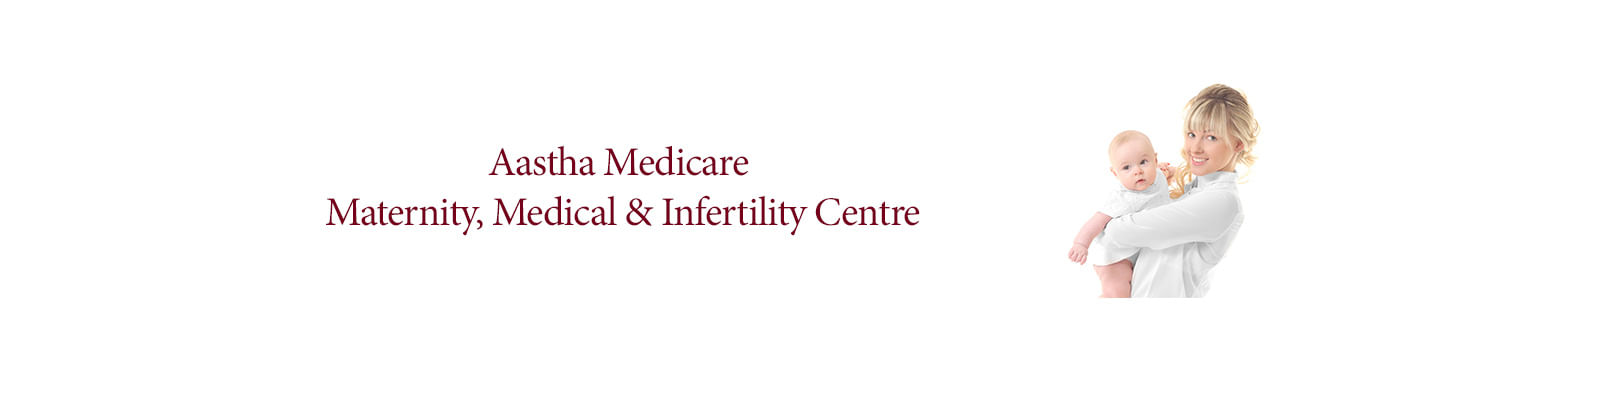 Dr. Anu's Aastha Medicare - Maternity, Medical & Infertility Centre